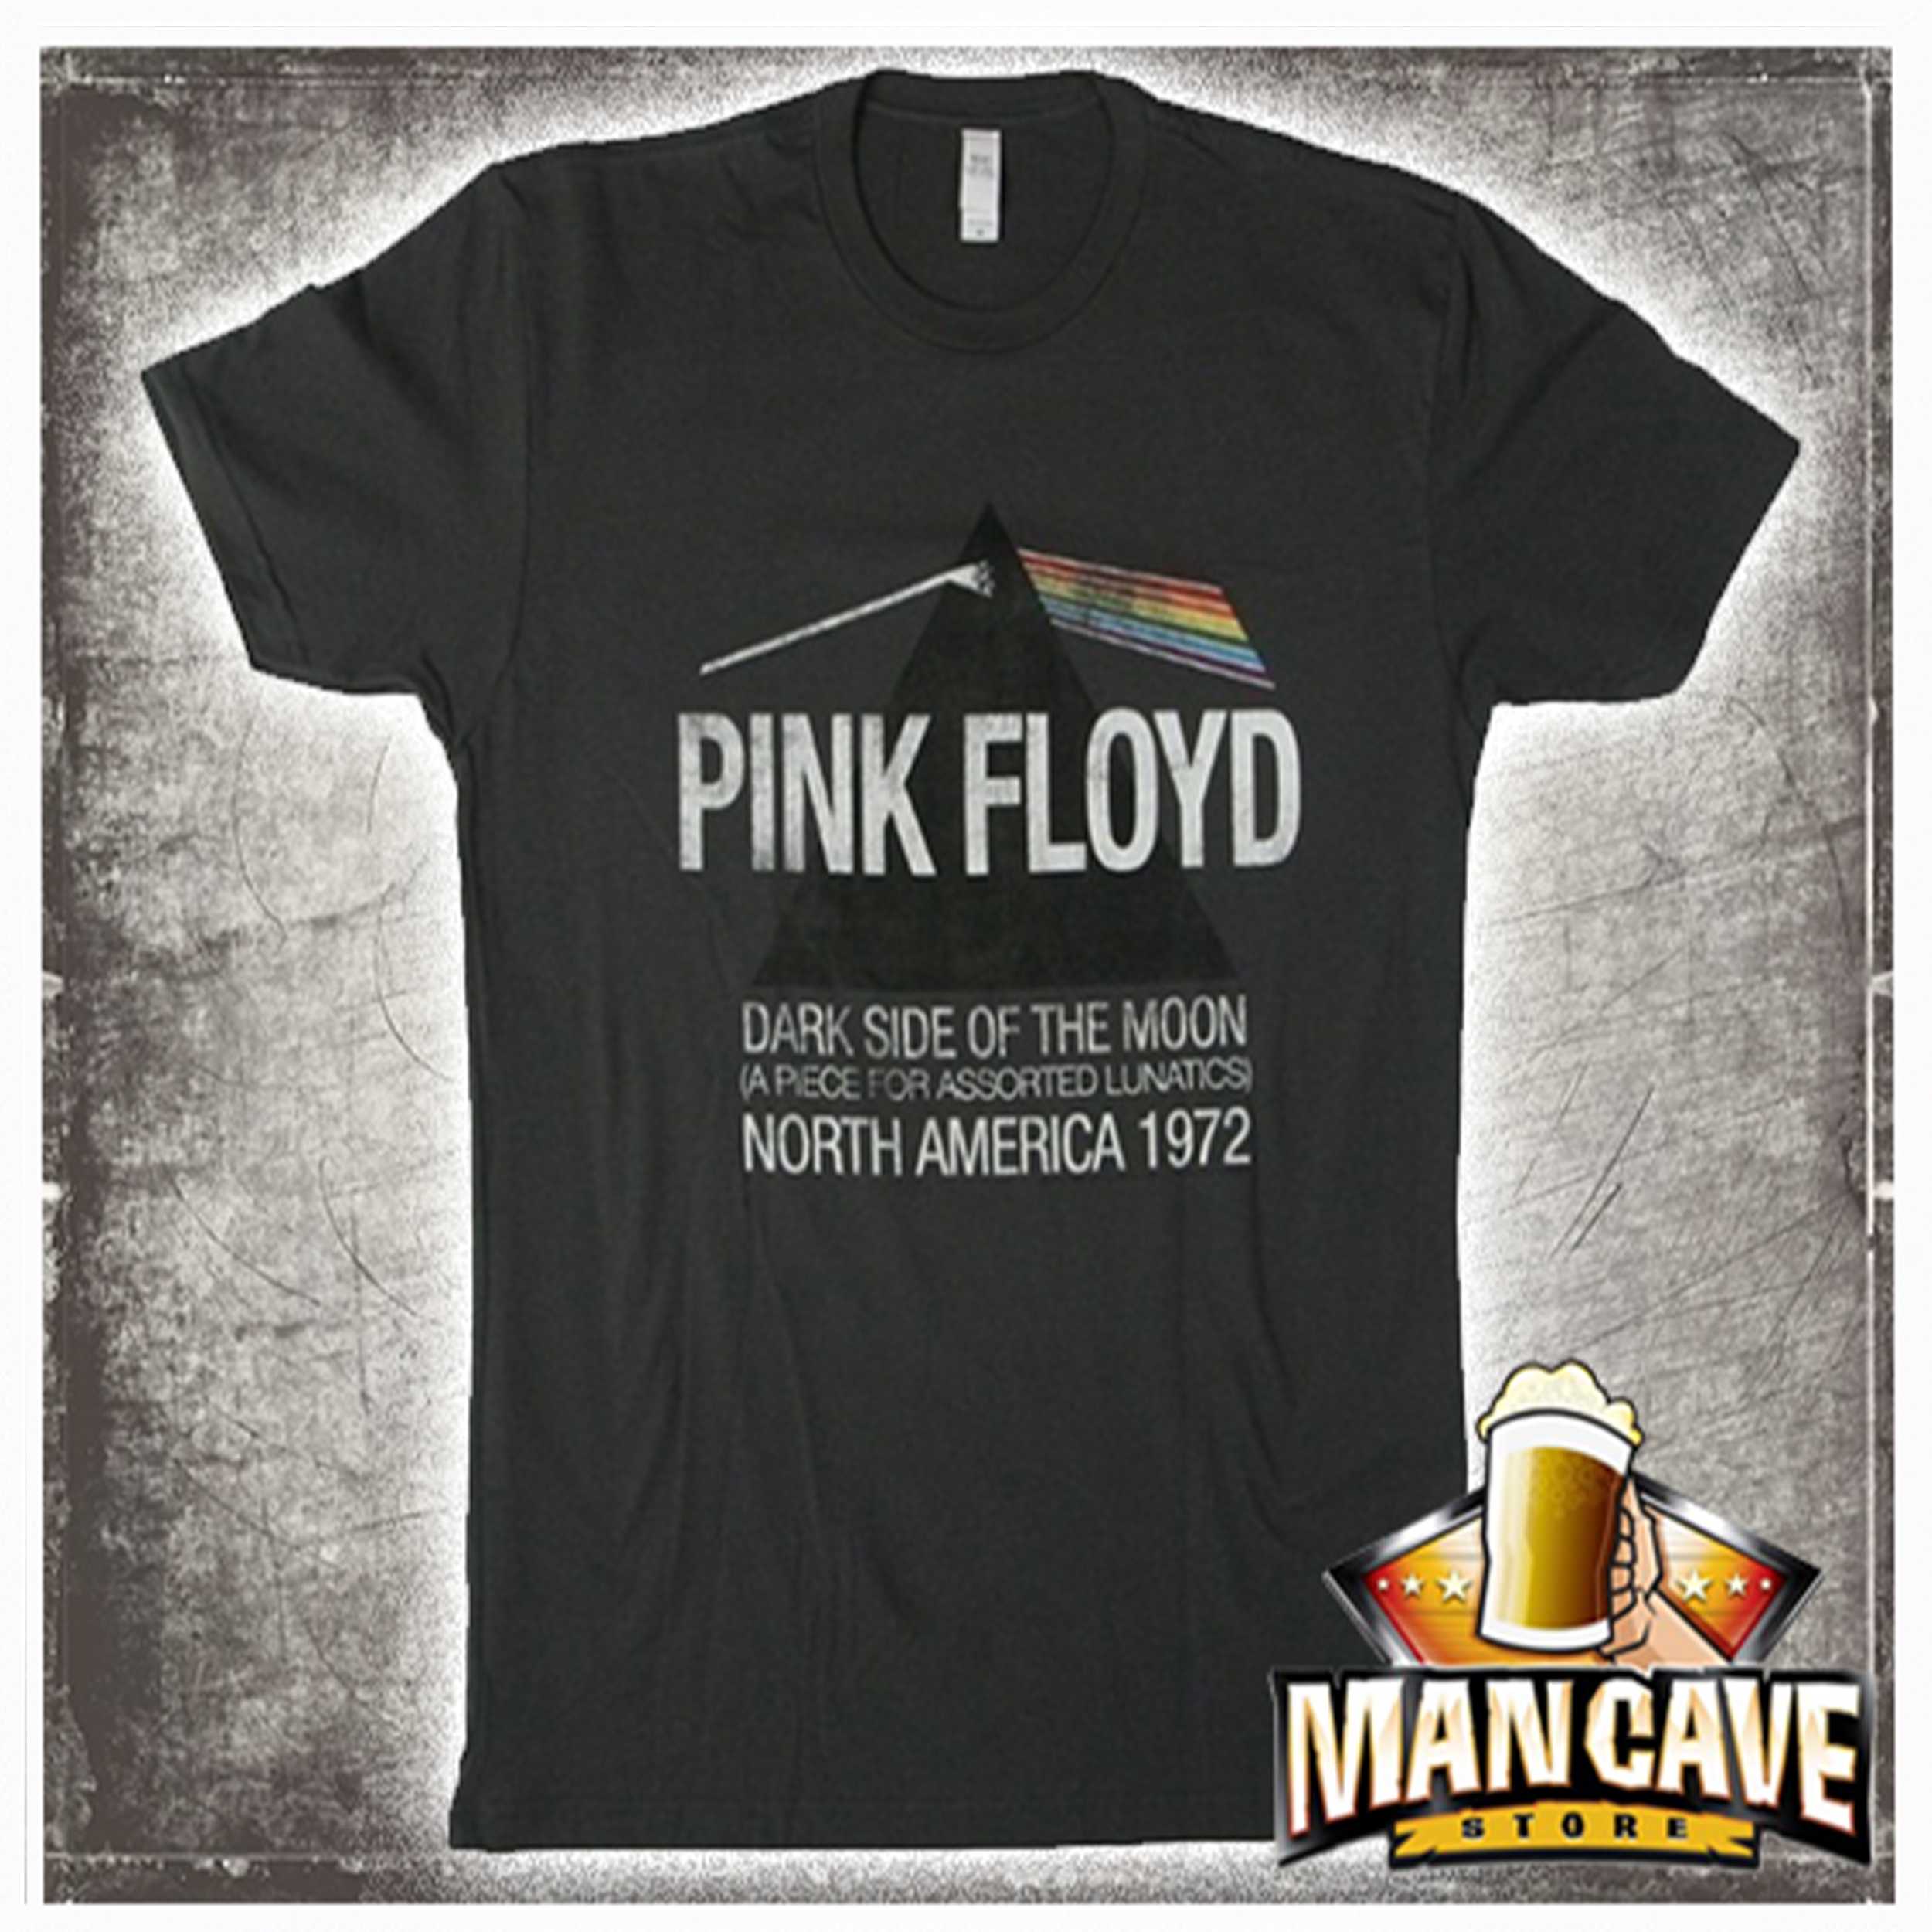 Pink Floyd 1972 Dark Side Of The Moon Tour T-Shirt